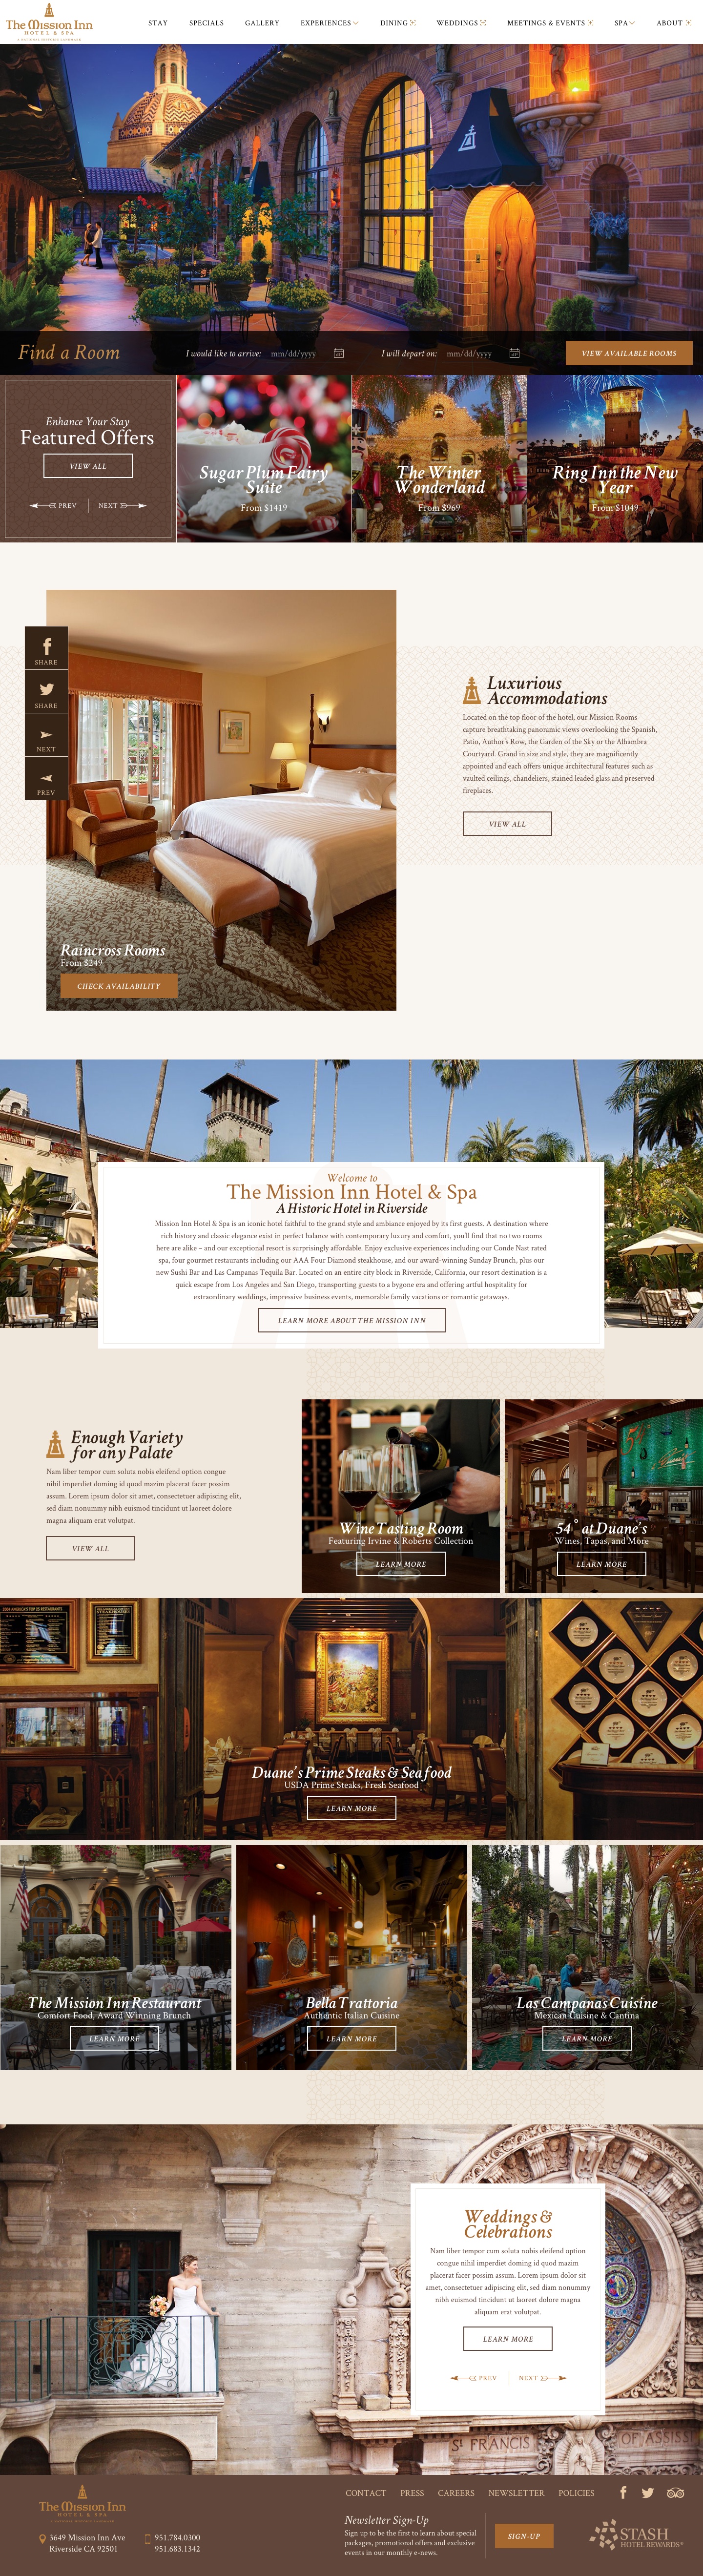 Mission Inn Hotel & Spa - Home Page Design